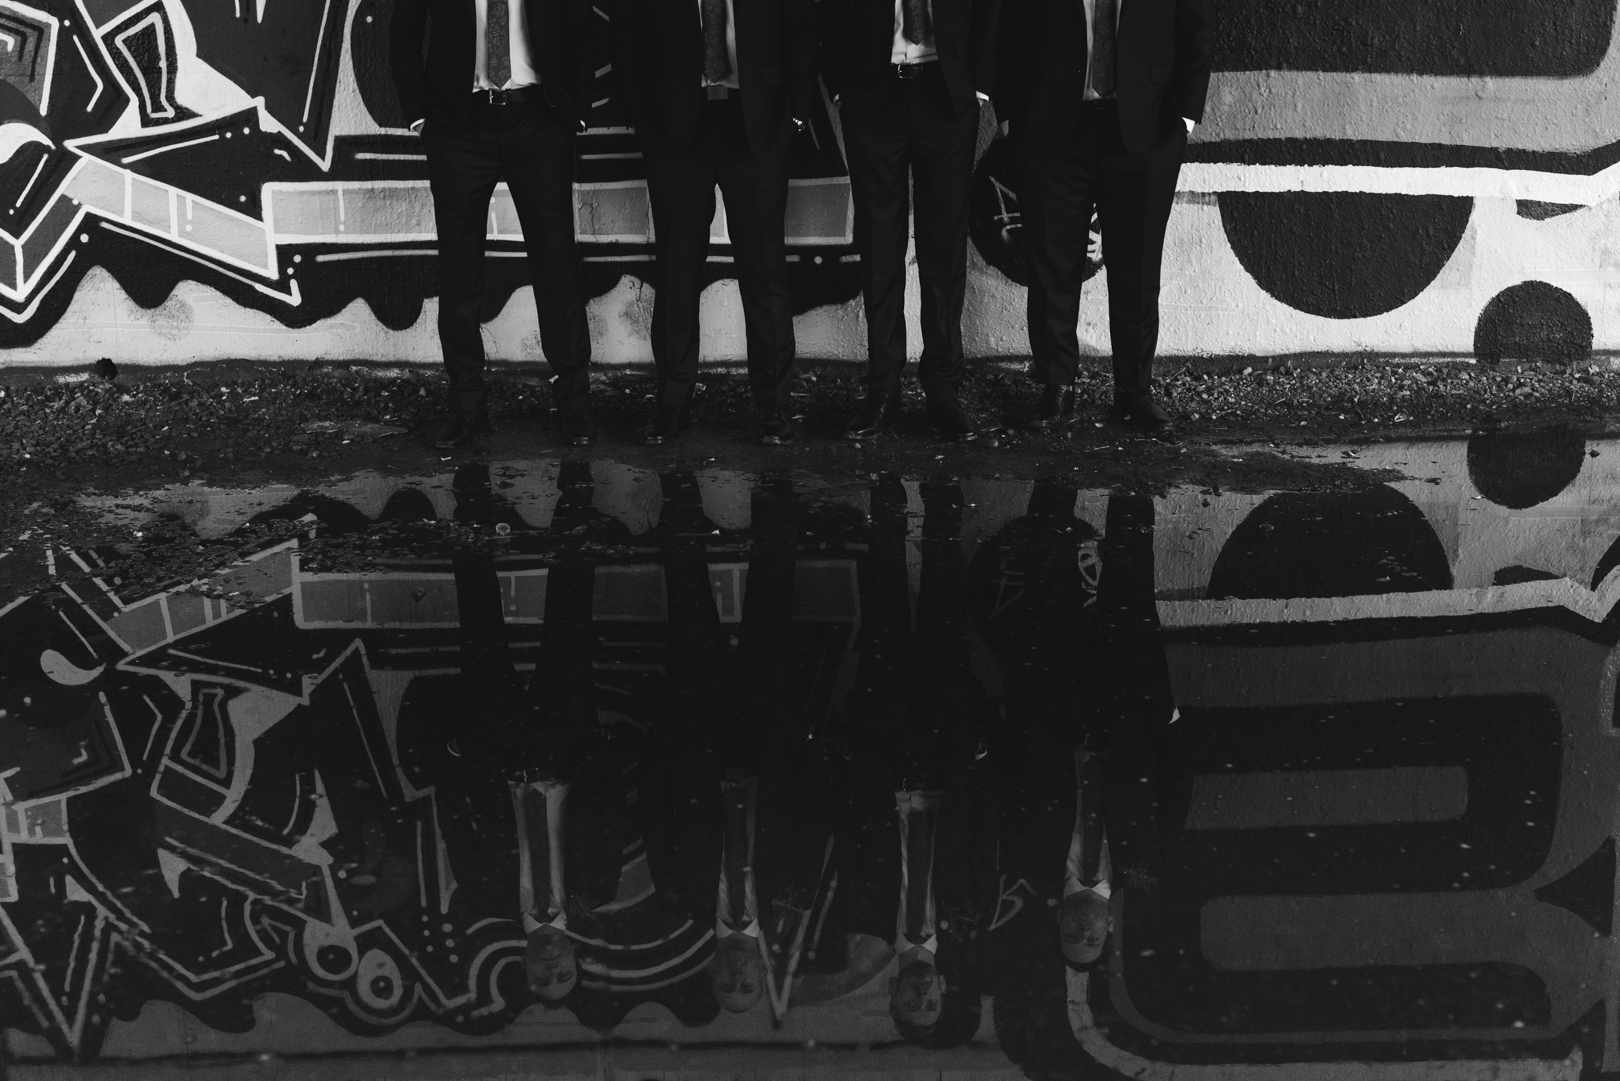 groom and groomsmen reflection in a puddle of water underneath a bridge with graffiti